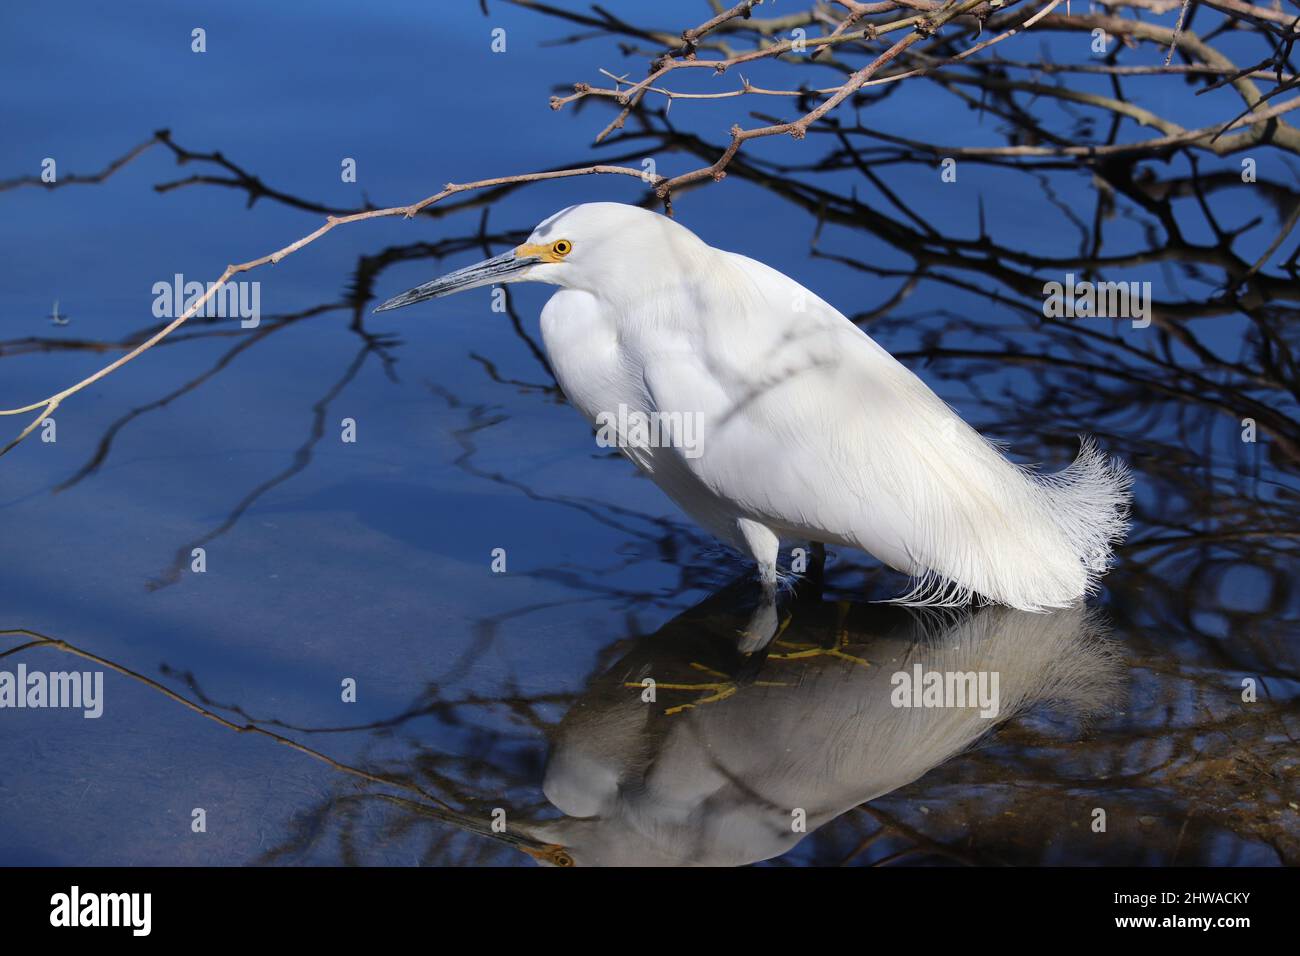 Snowy Egret or Egretta thula hunting for fish in a shallow pond at the Riparian at water ranch in Arizona. Stock Photo